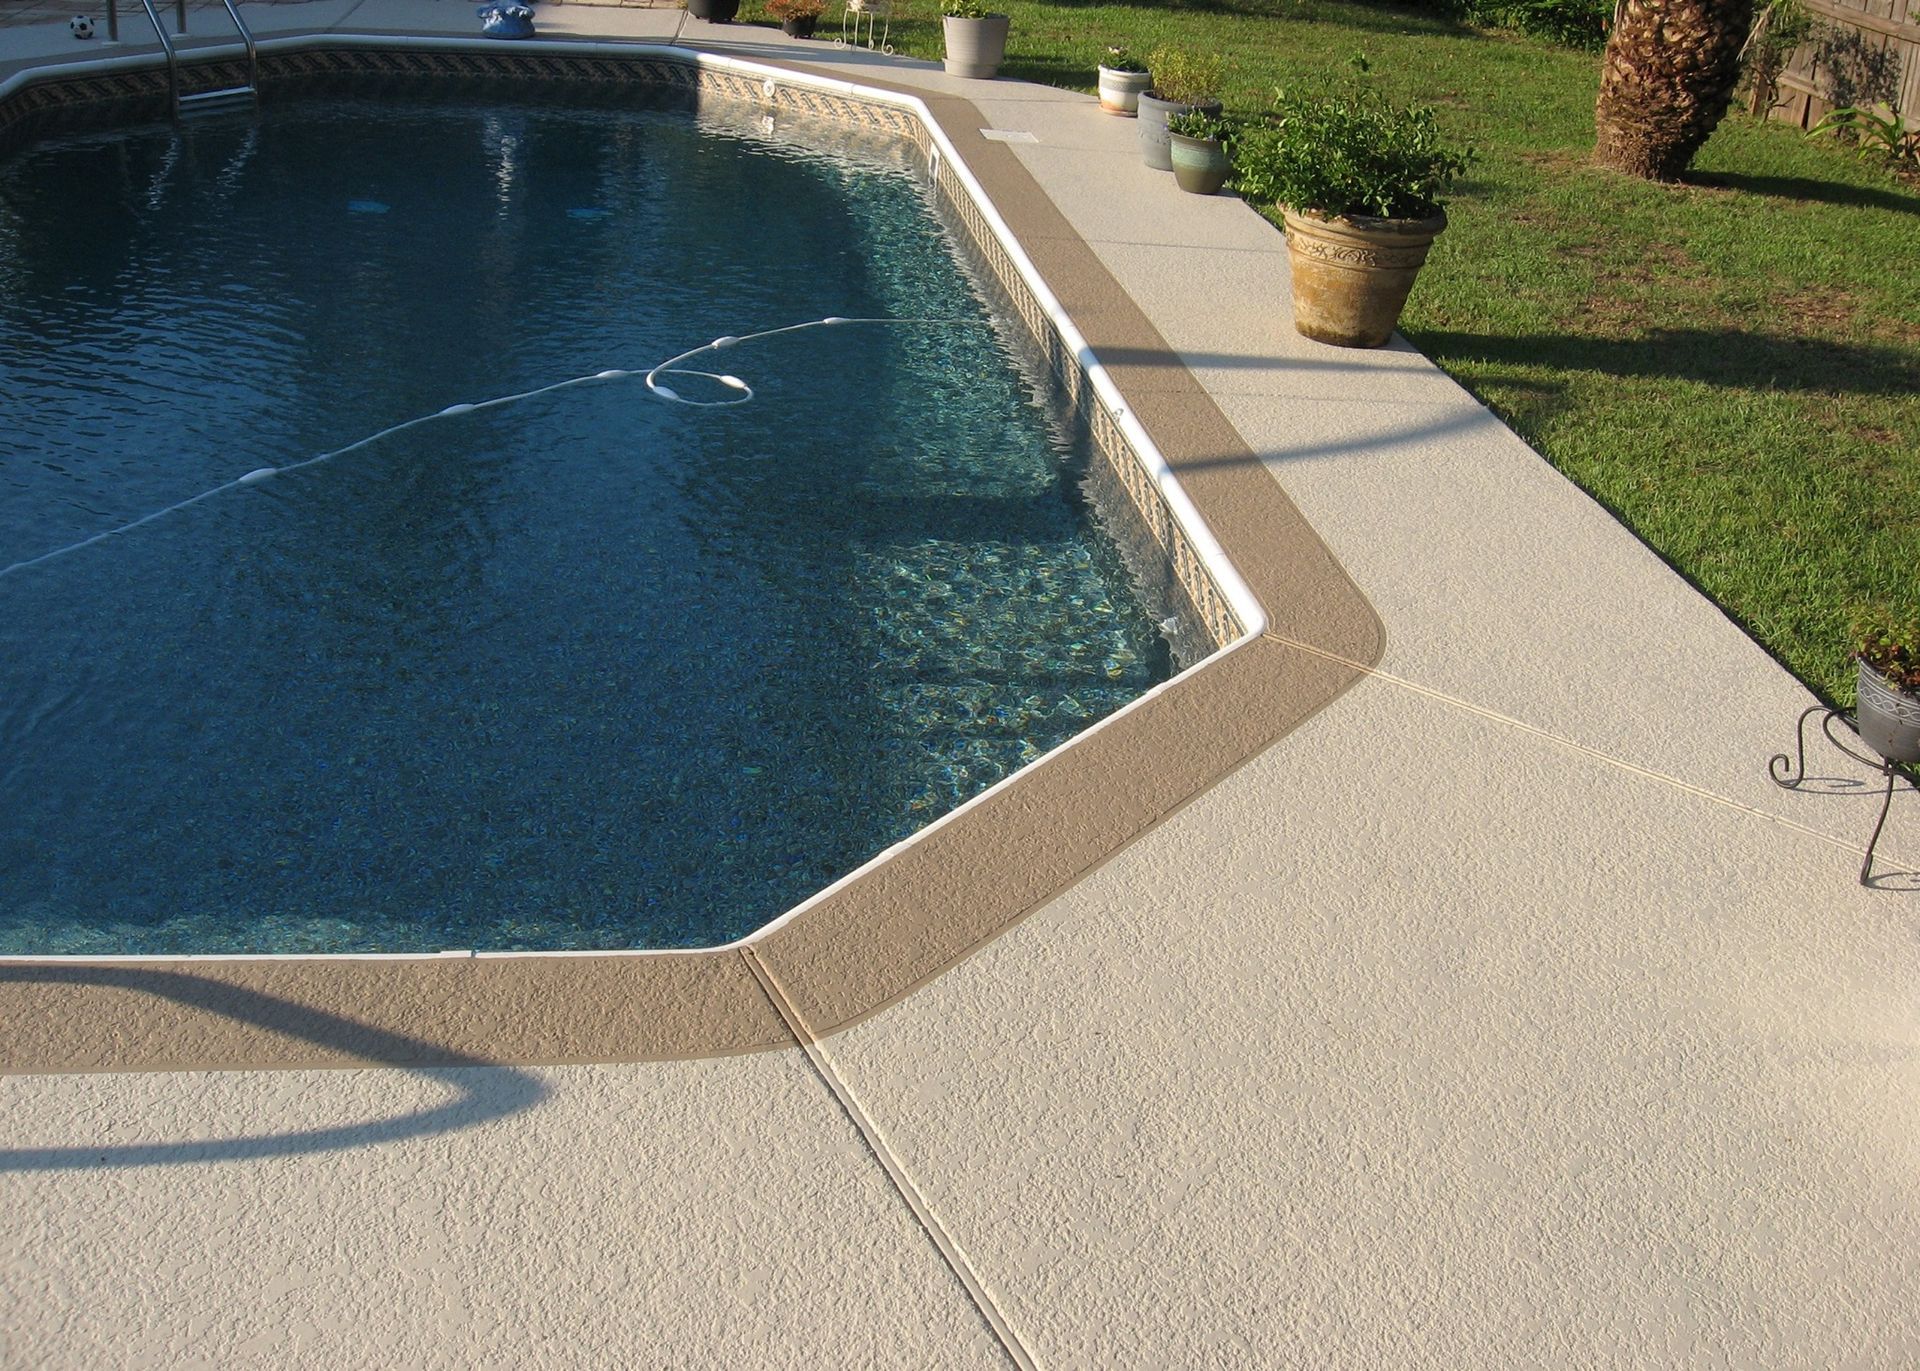 A large swimming pool is surrounded by a concrete deck